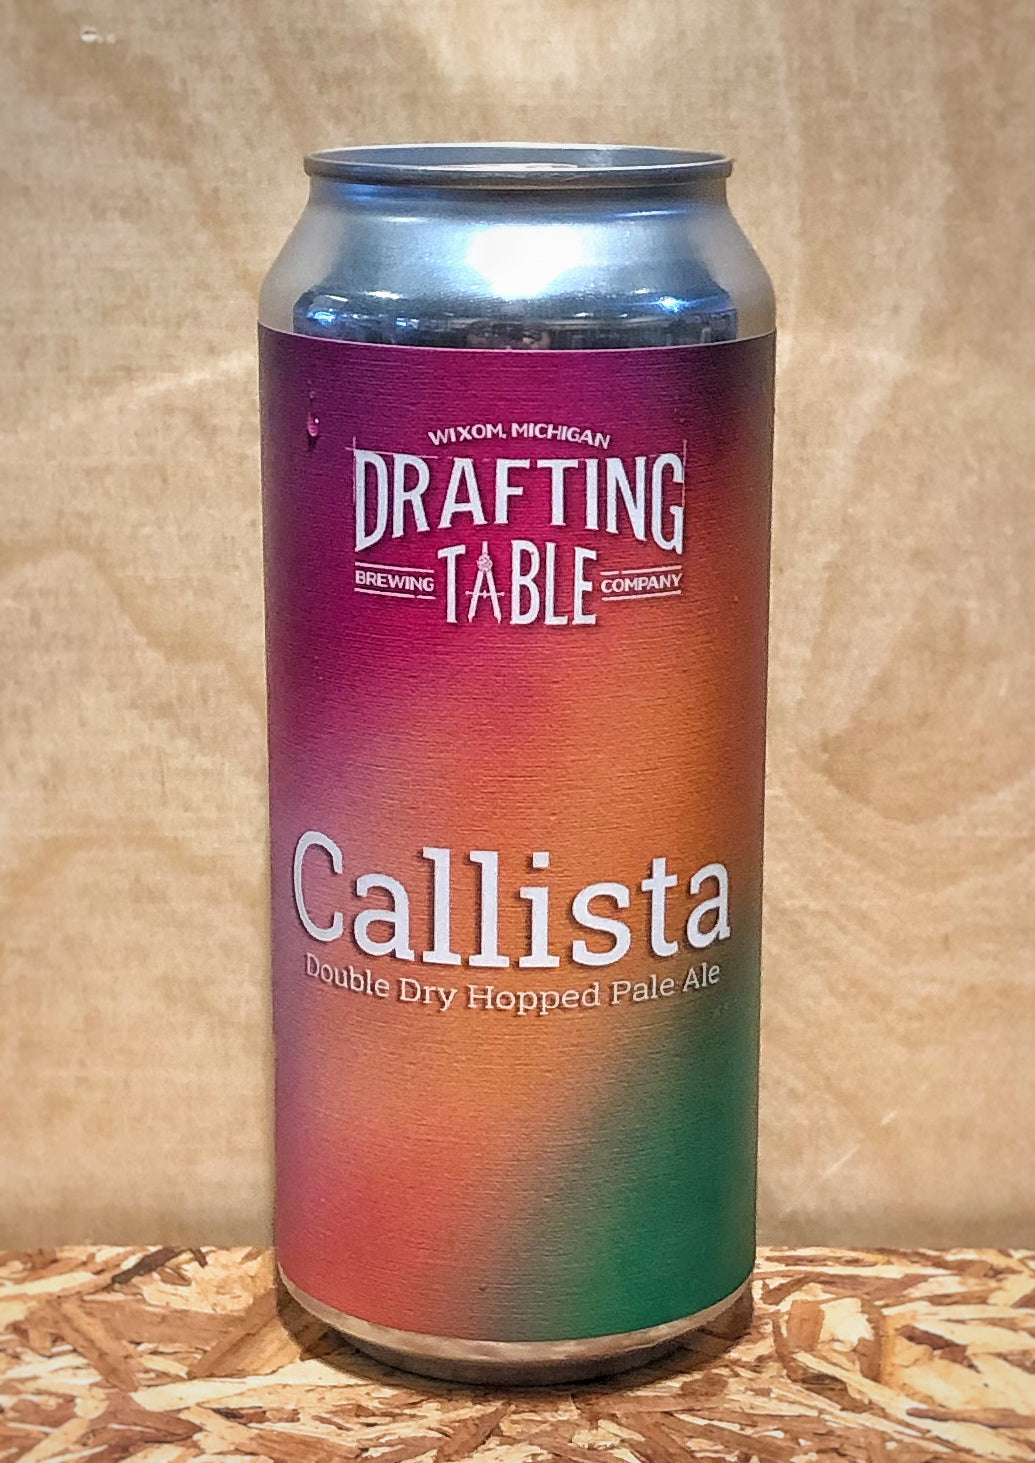 Drafting Table Brewing Co. 'Callista' Double Dry Hopped Pale Ale (Wixom, MI)